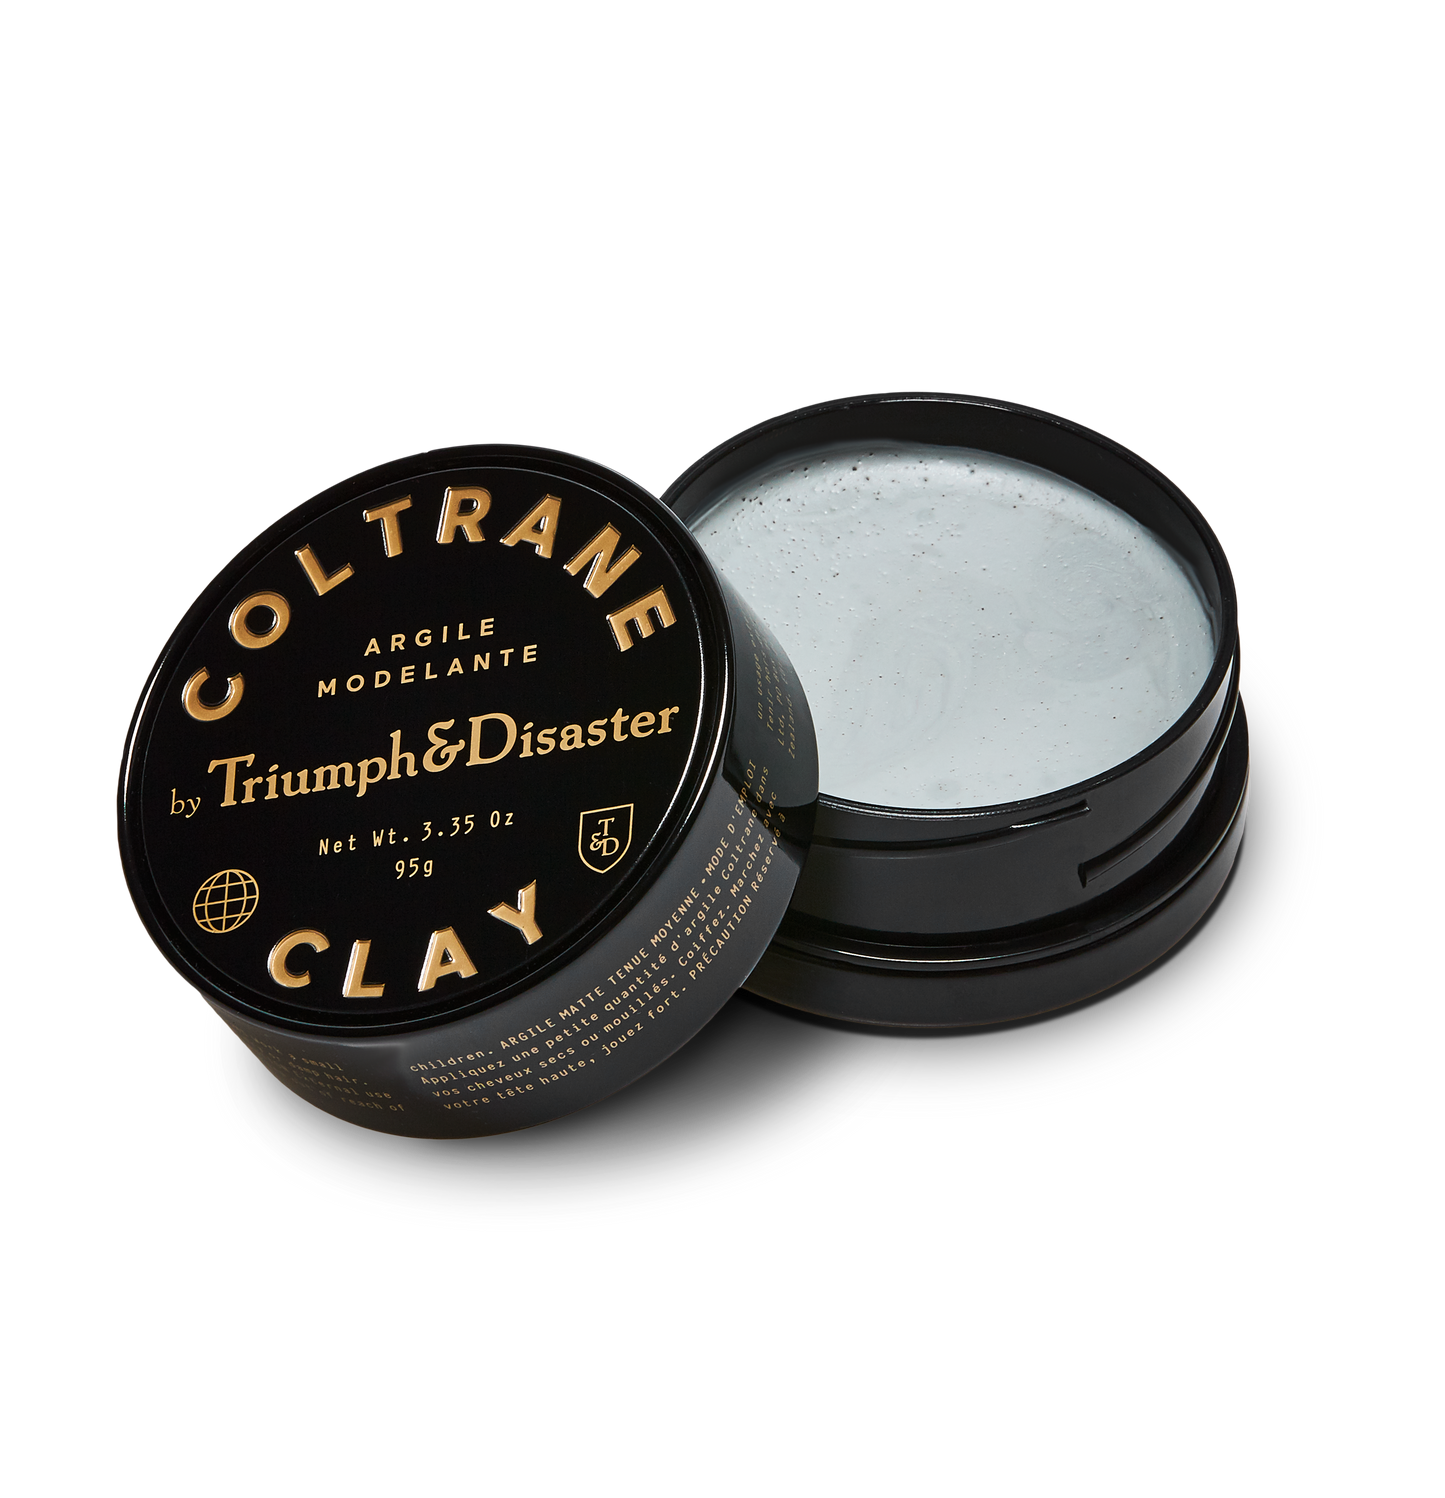 Coltrane Clay by Triumph and Disaster